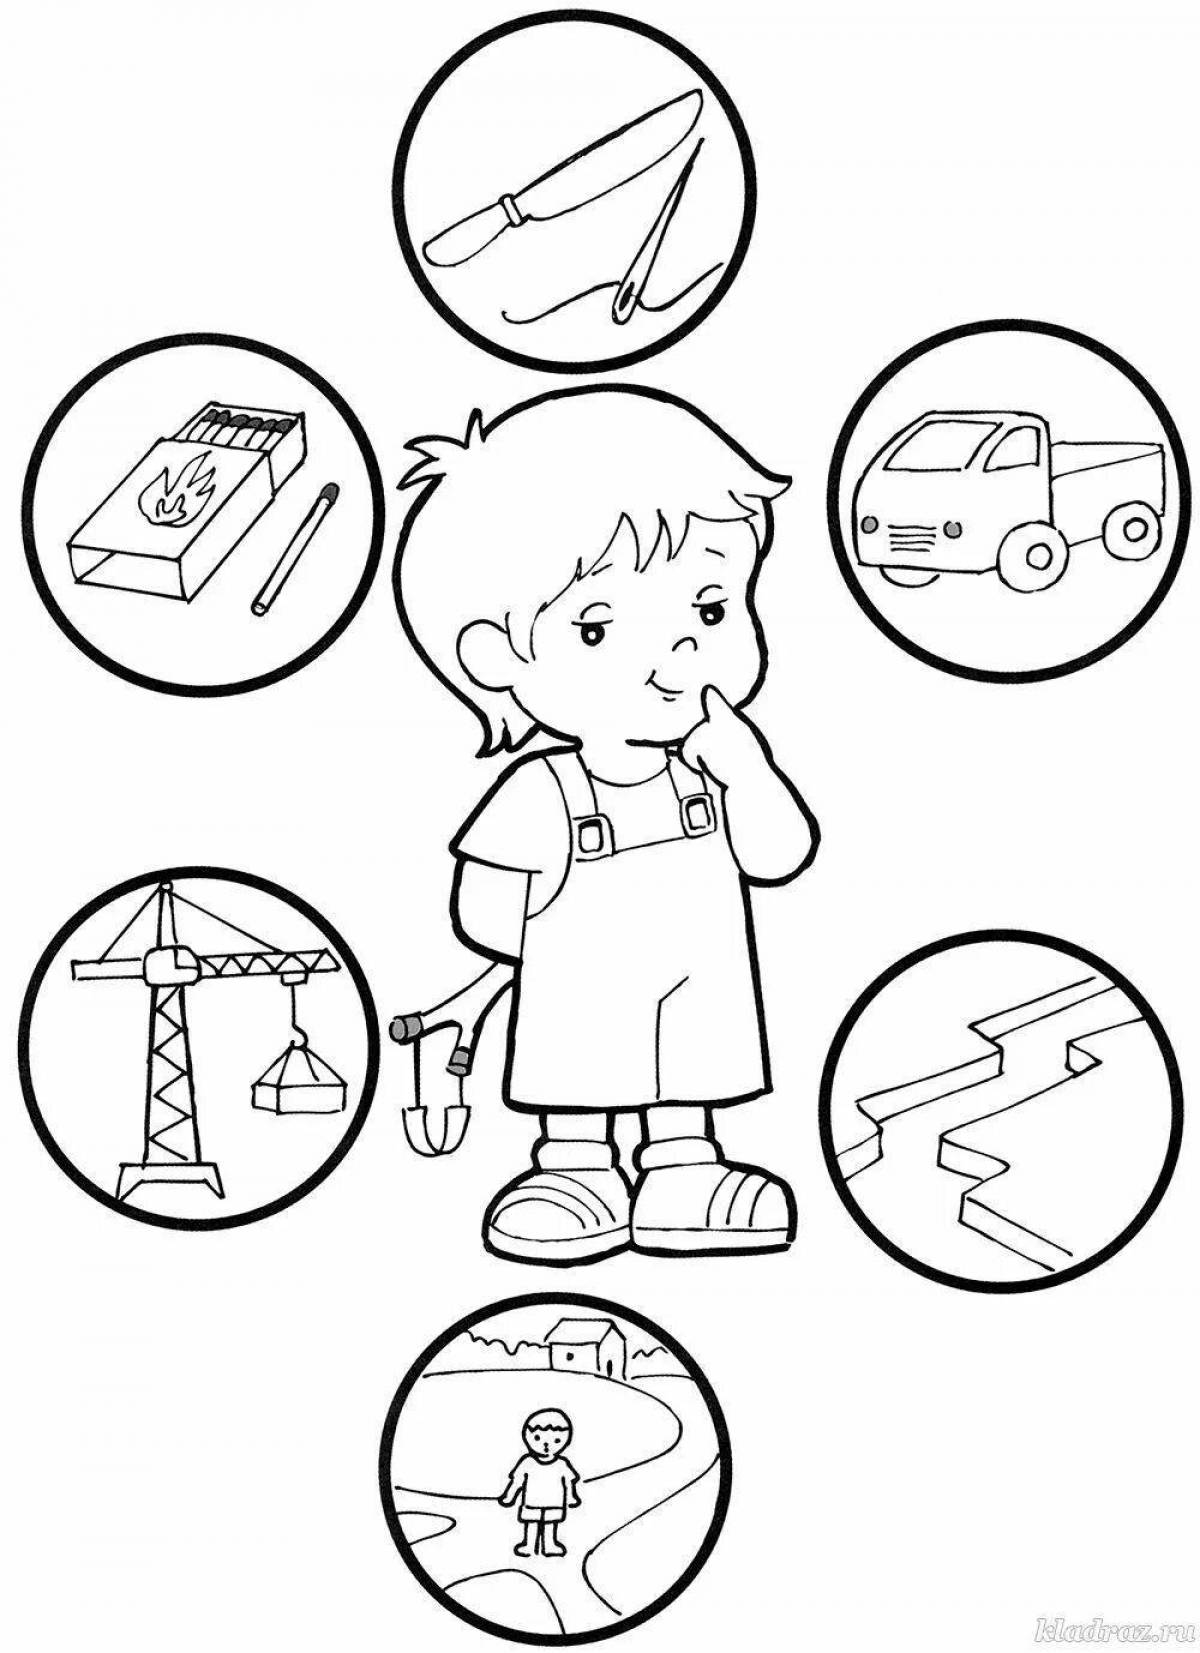 Coloring page exciting domestic dangers